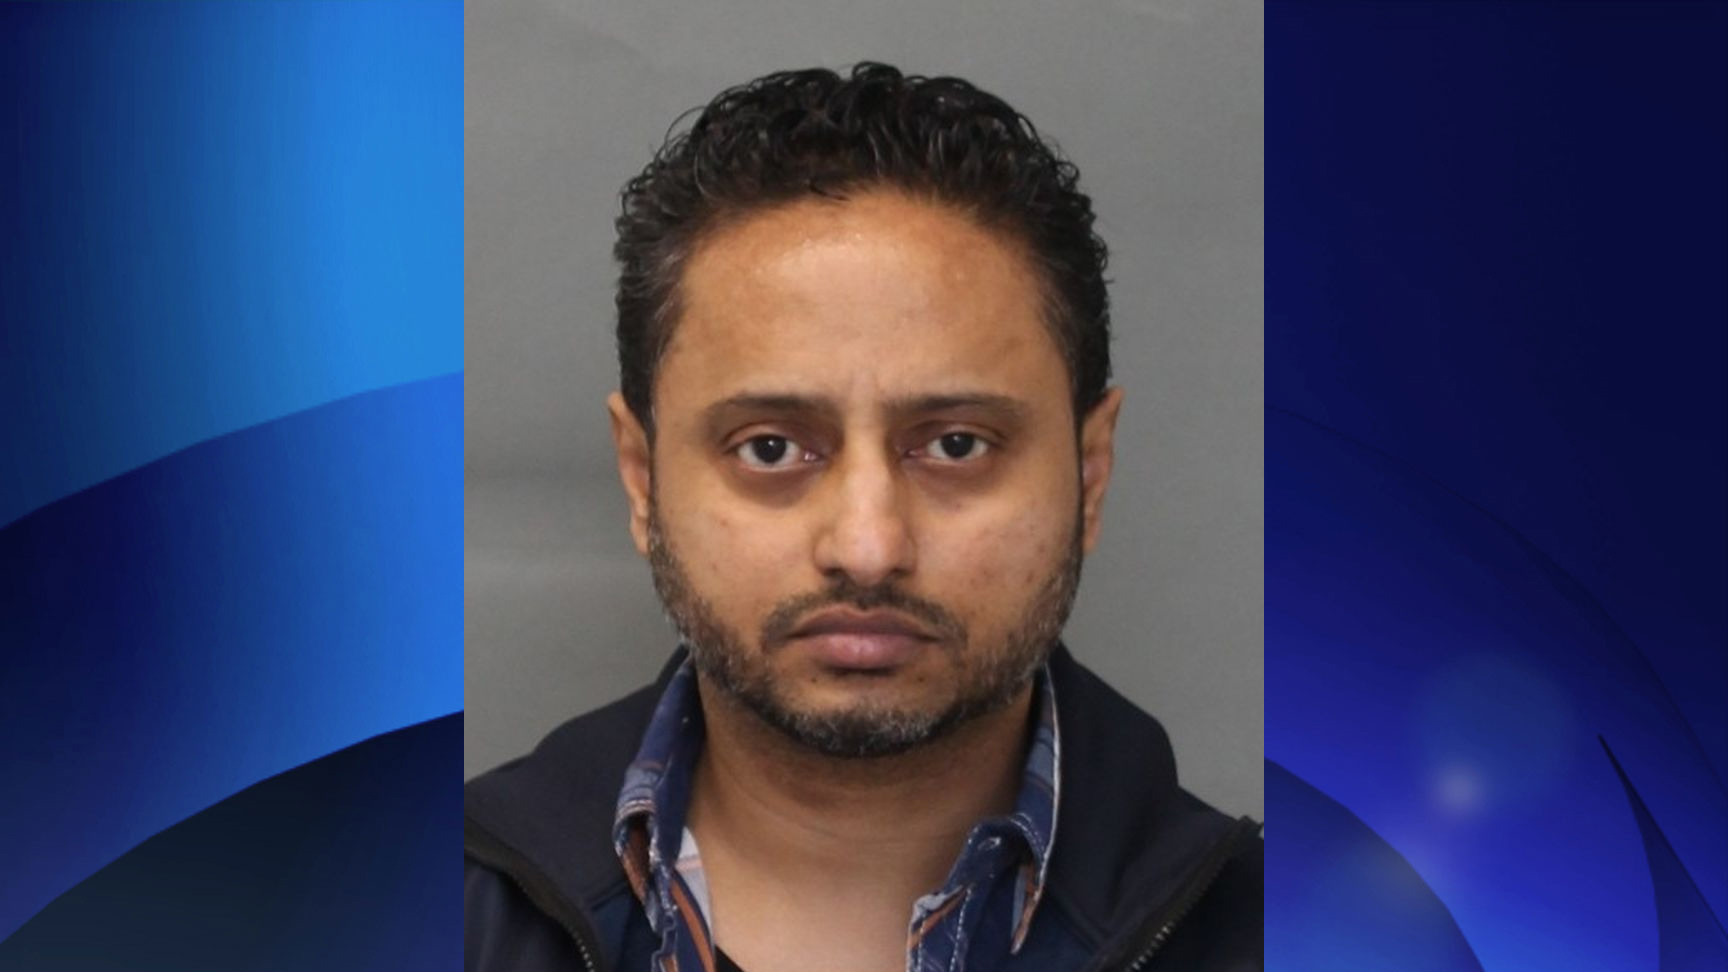 Uber Driver Charged With Sexually Assaulting 15 Year Old Girl